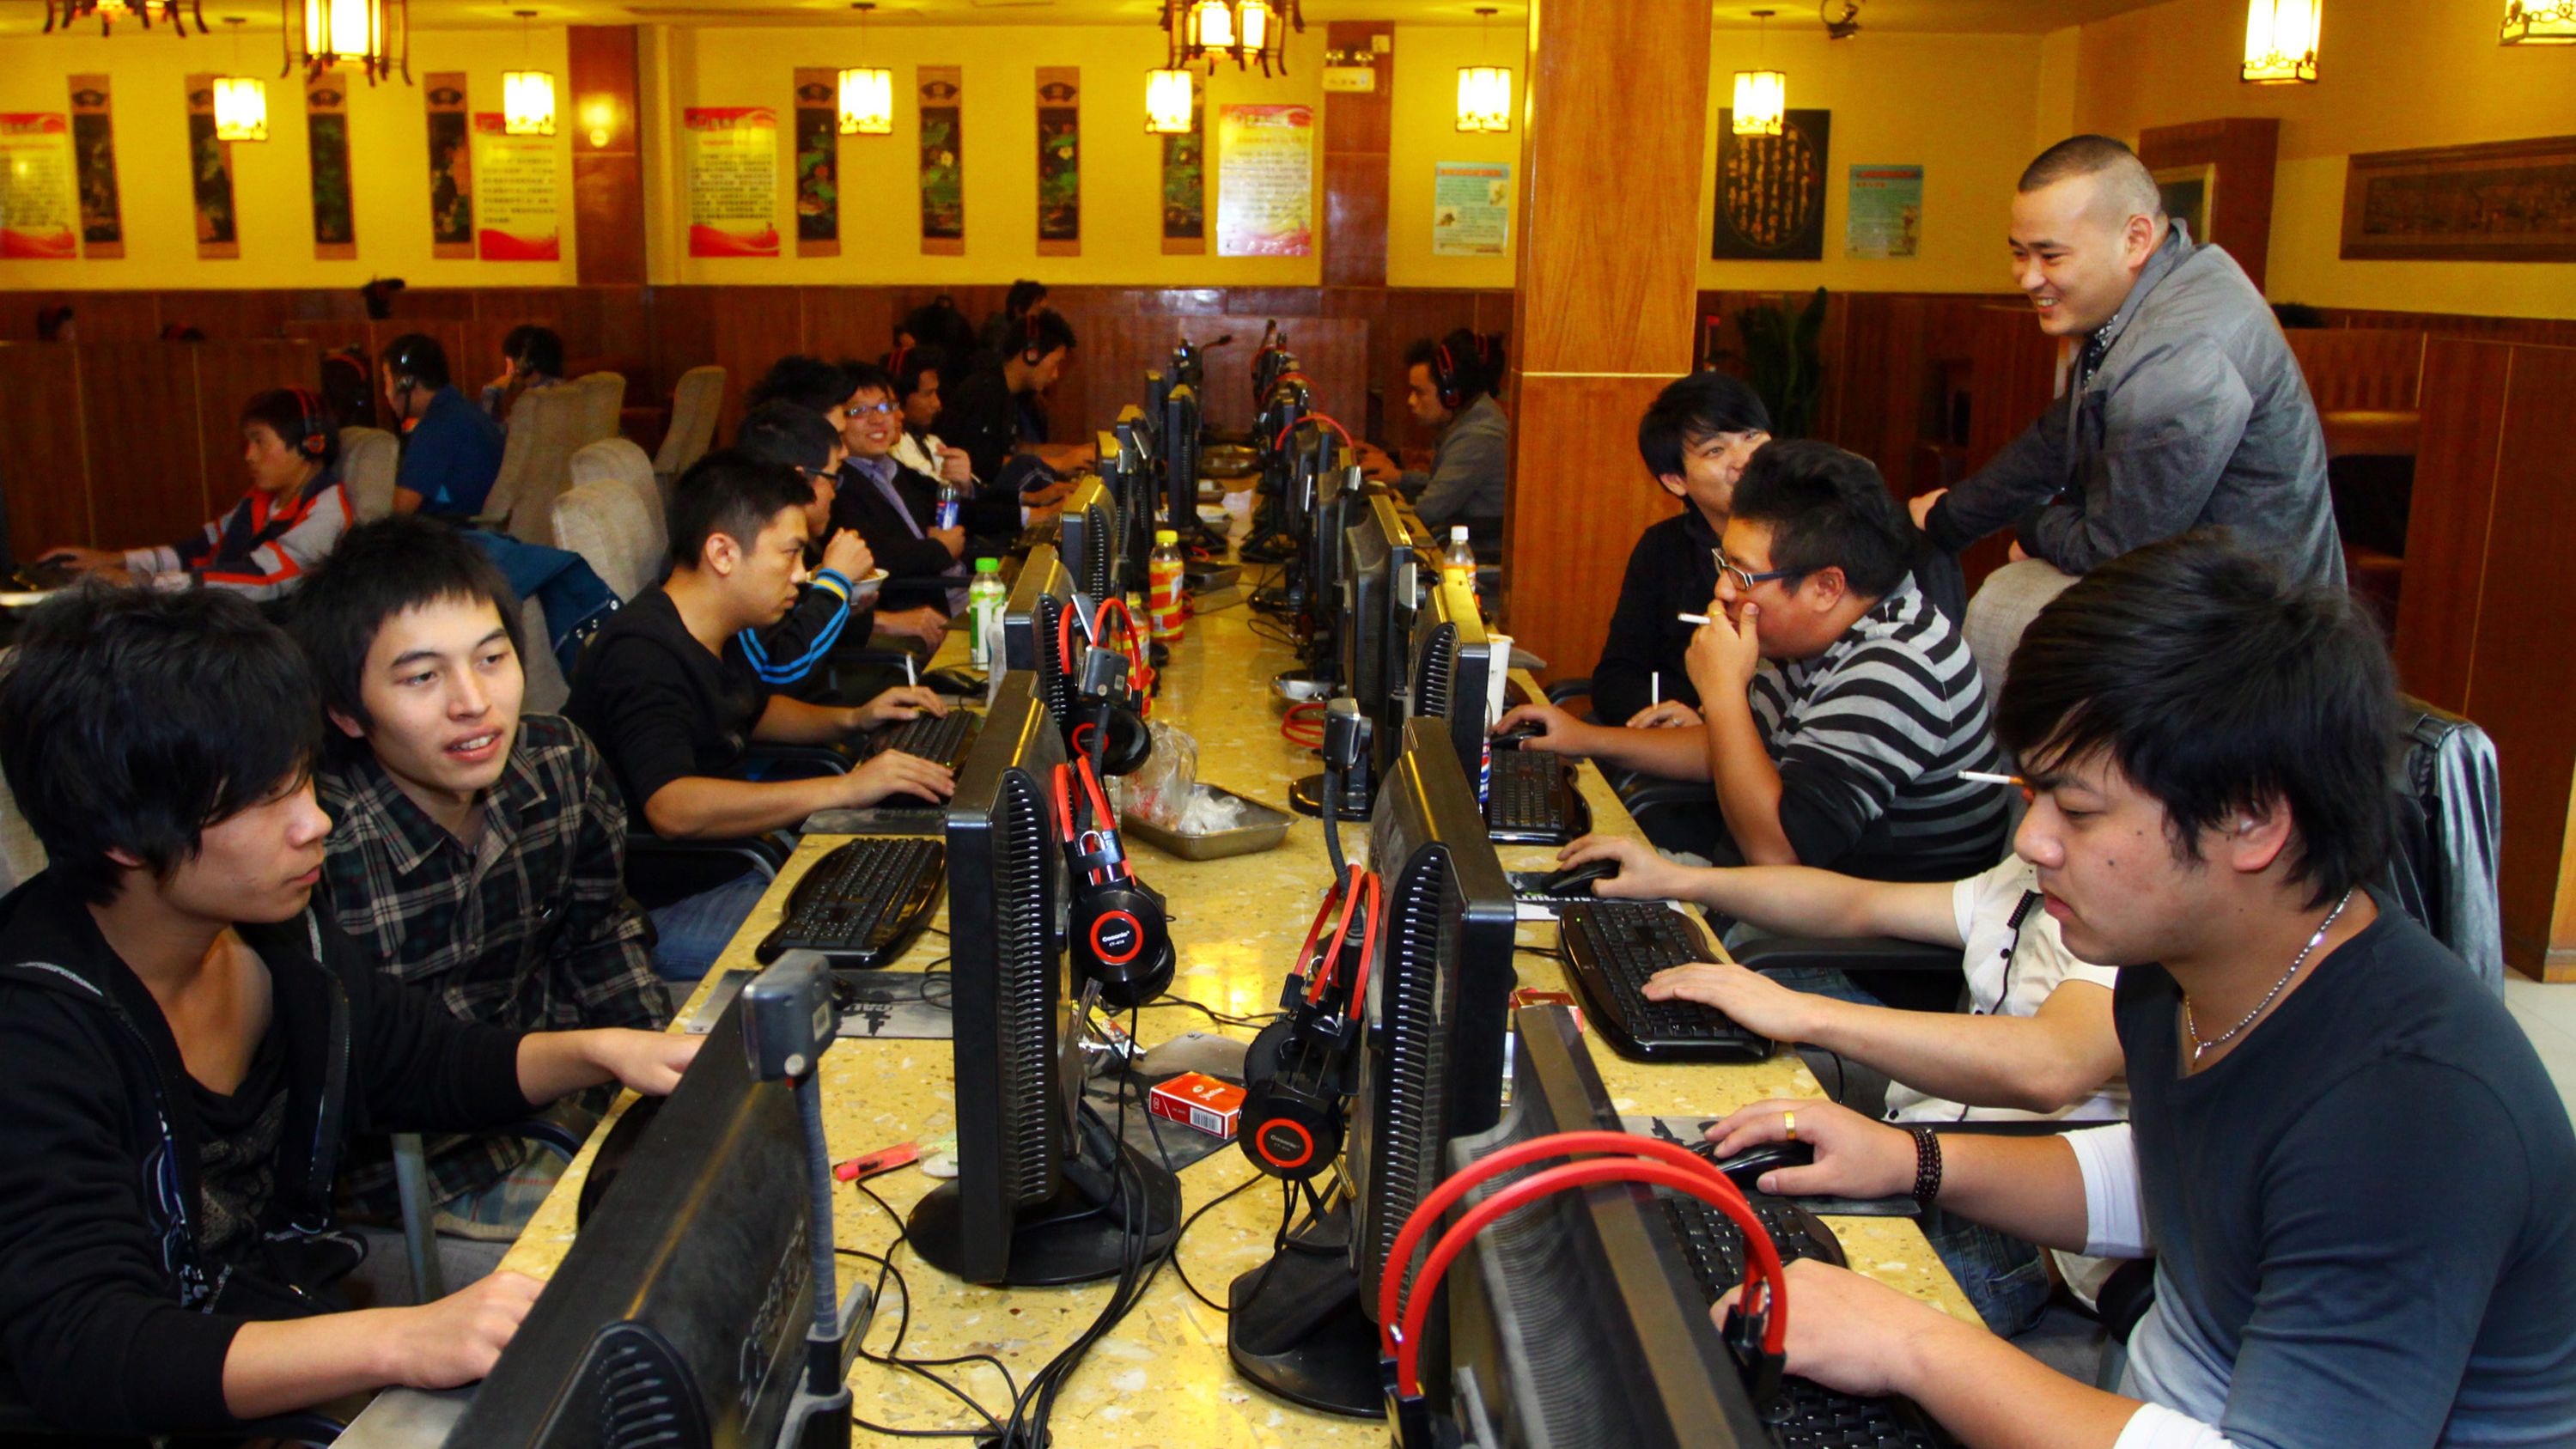 An Internet cafe in Zhejiang with some of China's more than 600 million Internet users.